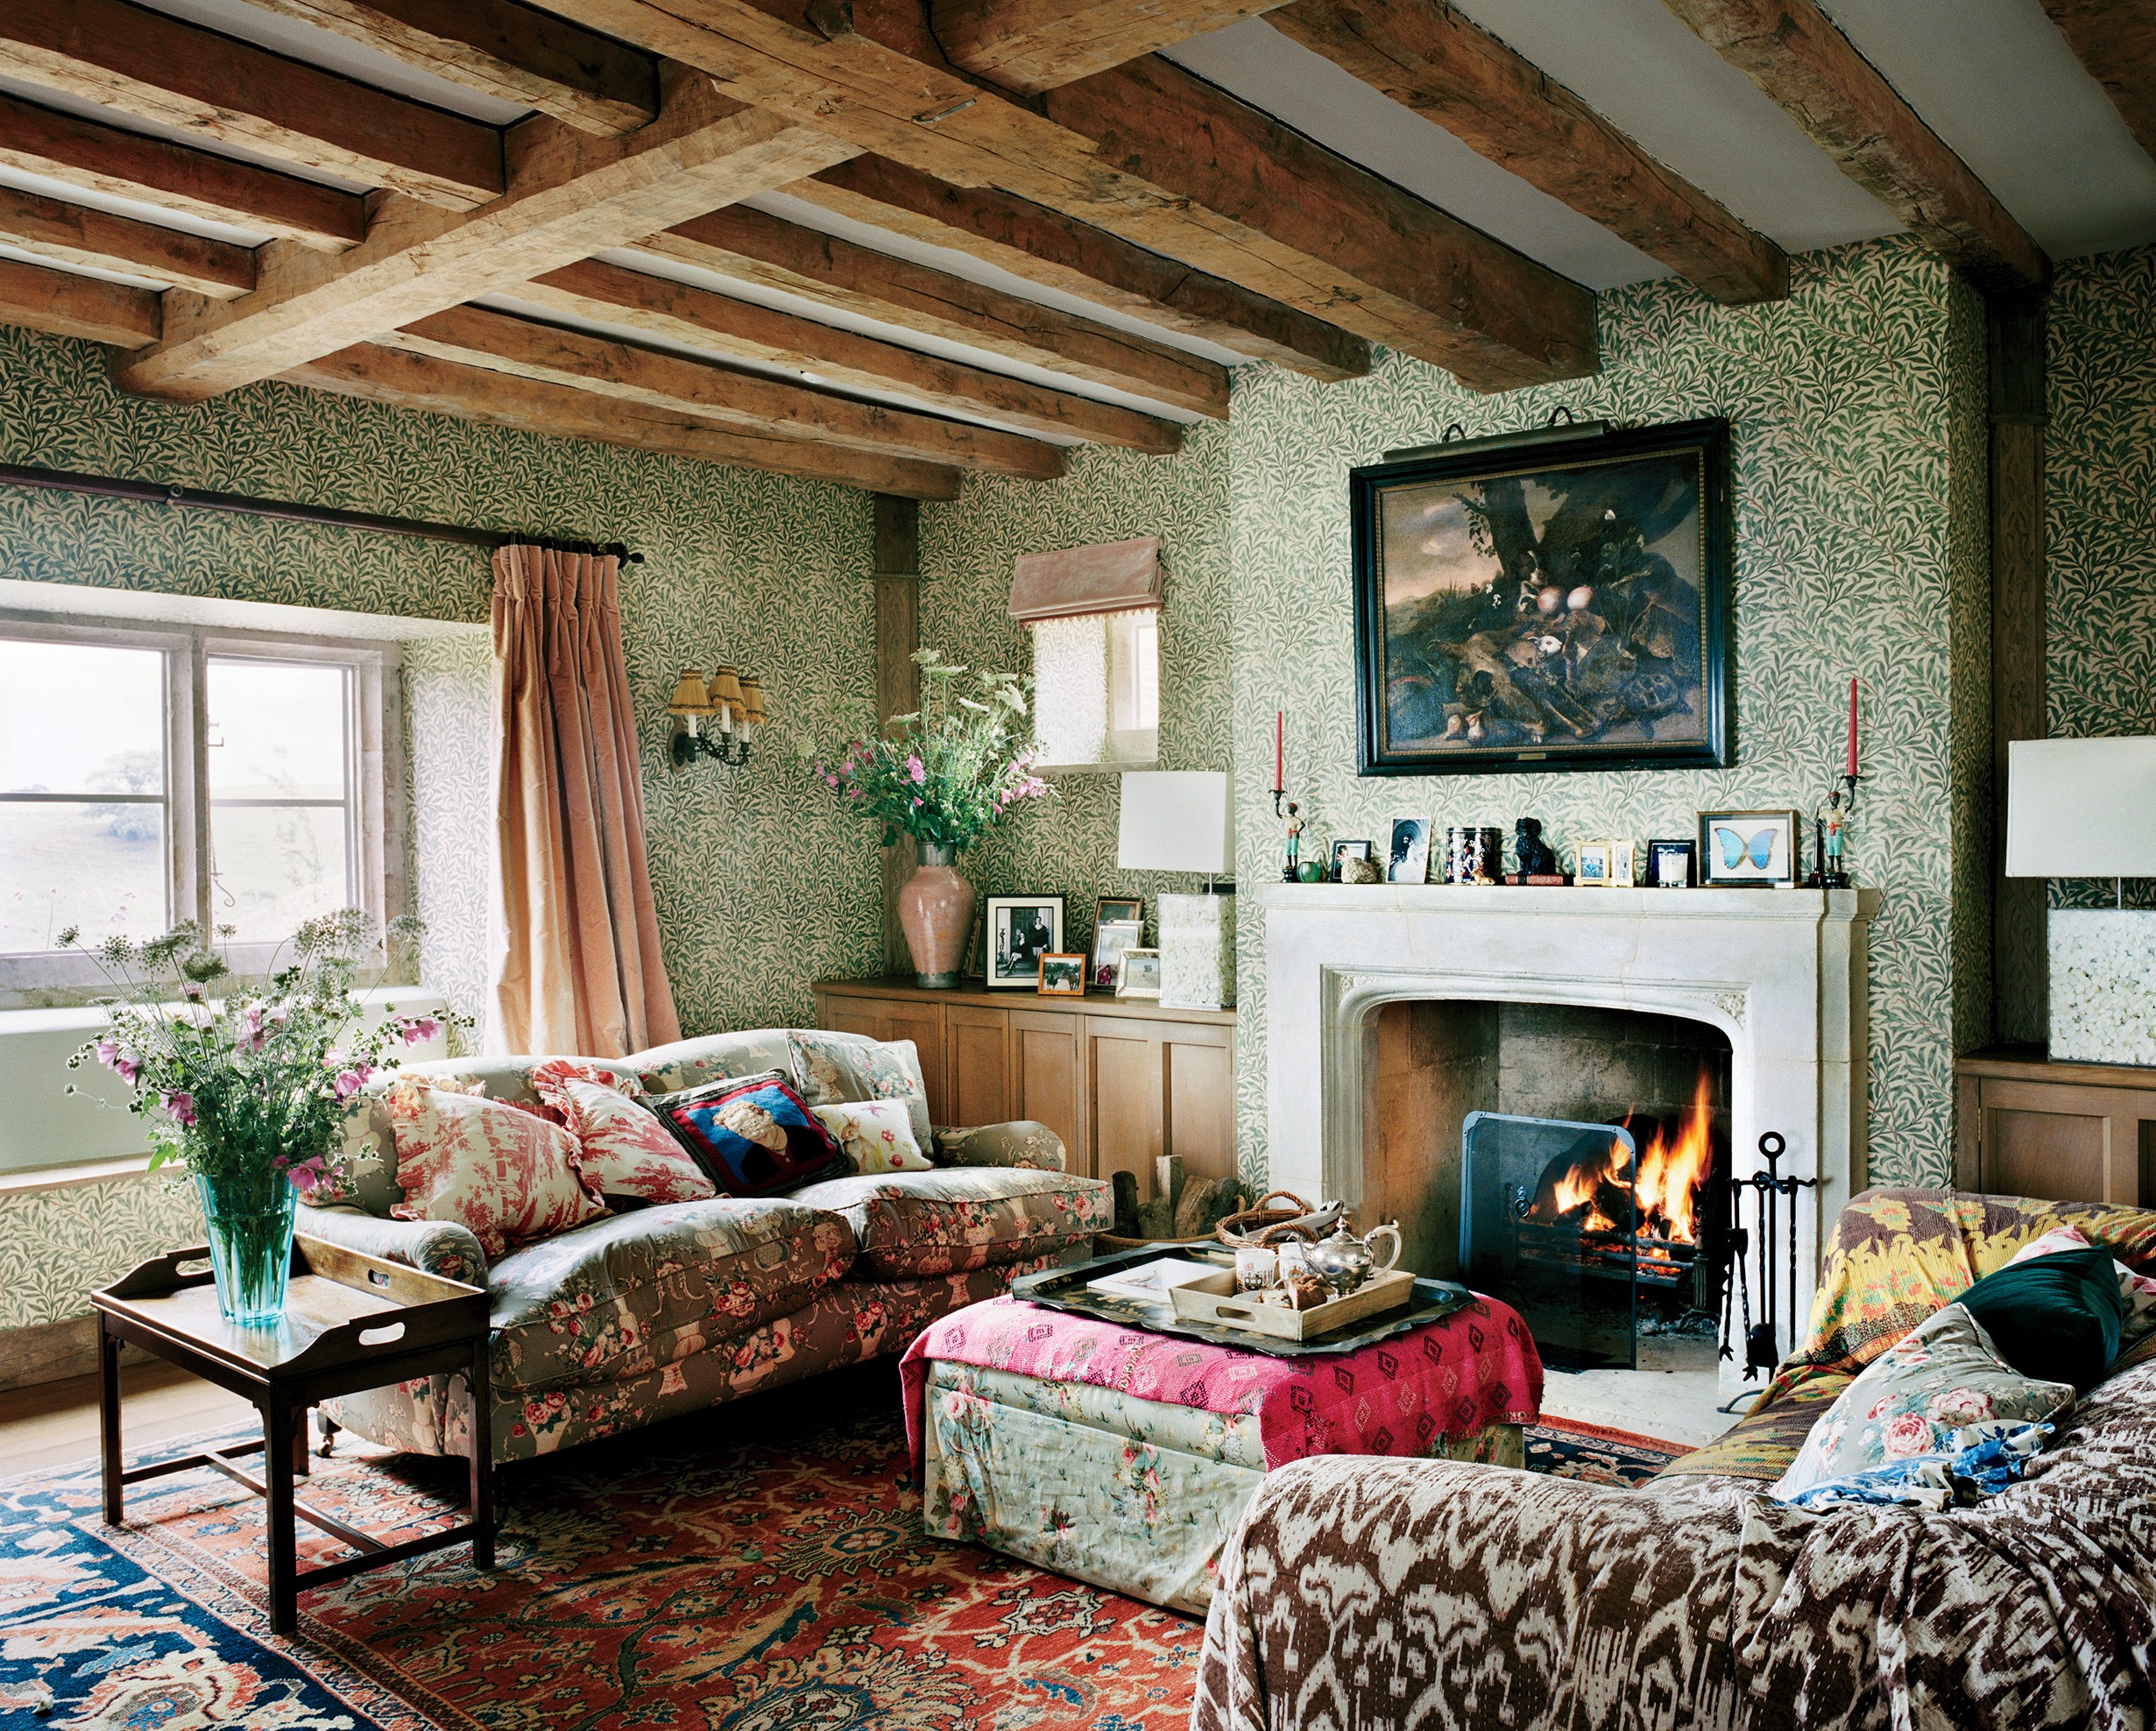 Plum Sykes English Country House William Morris Wallpaper Willow Boughs Chintz Roll Arm Sofa Fireplace Mantle Exposed Beams